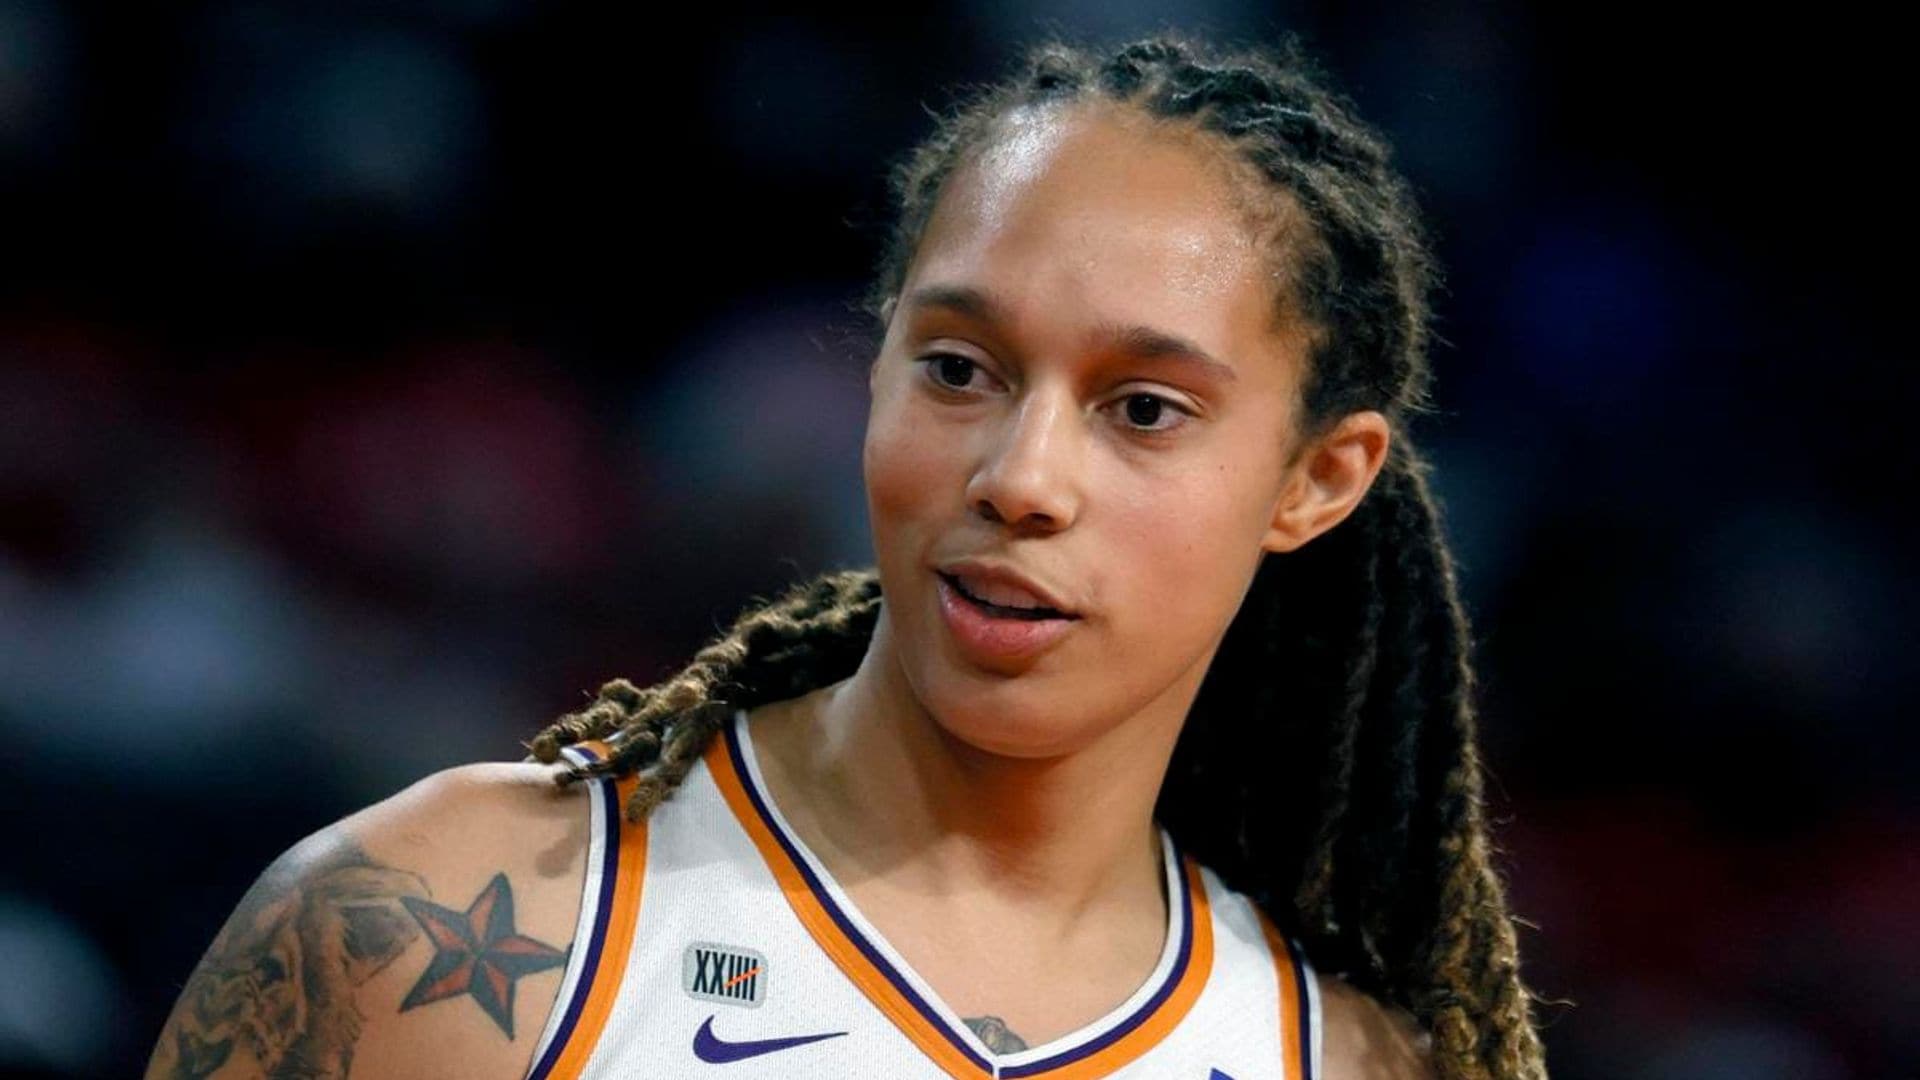 Brittney Griner arrives in the US: The athlete reunites with her family in Texas